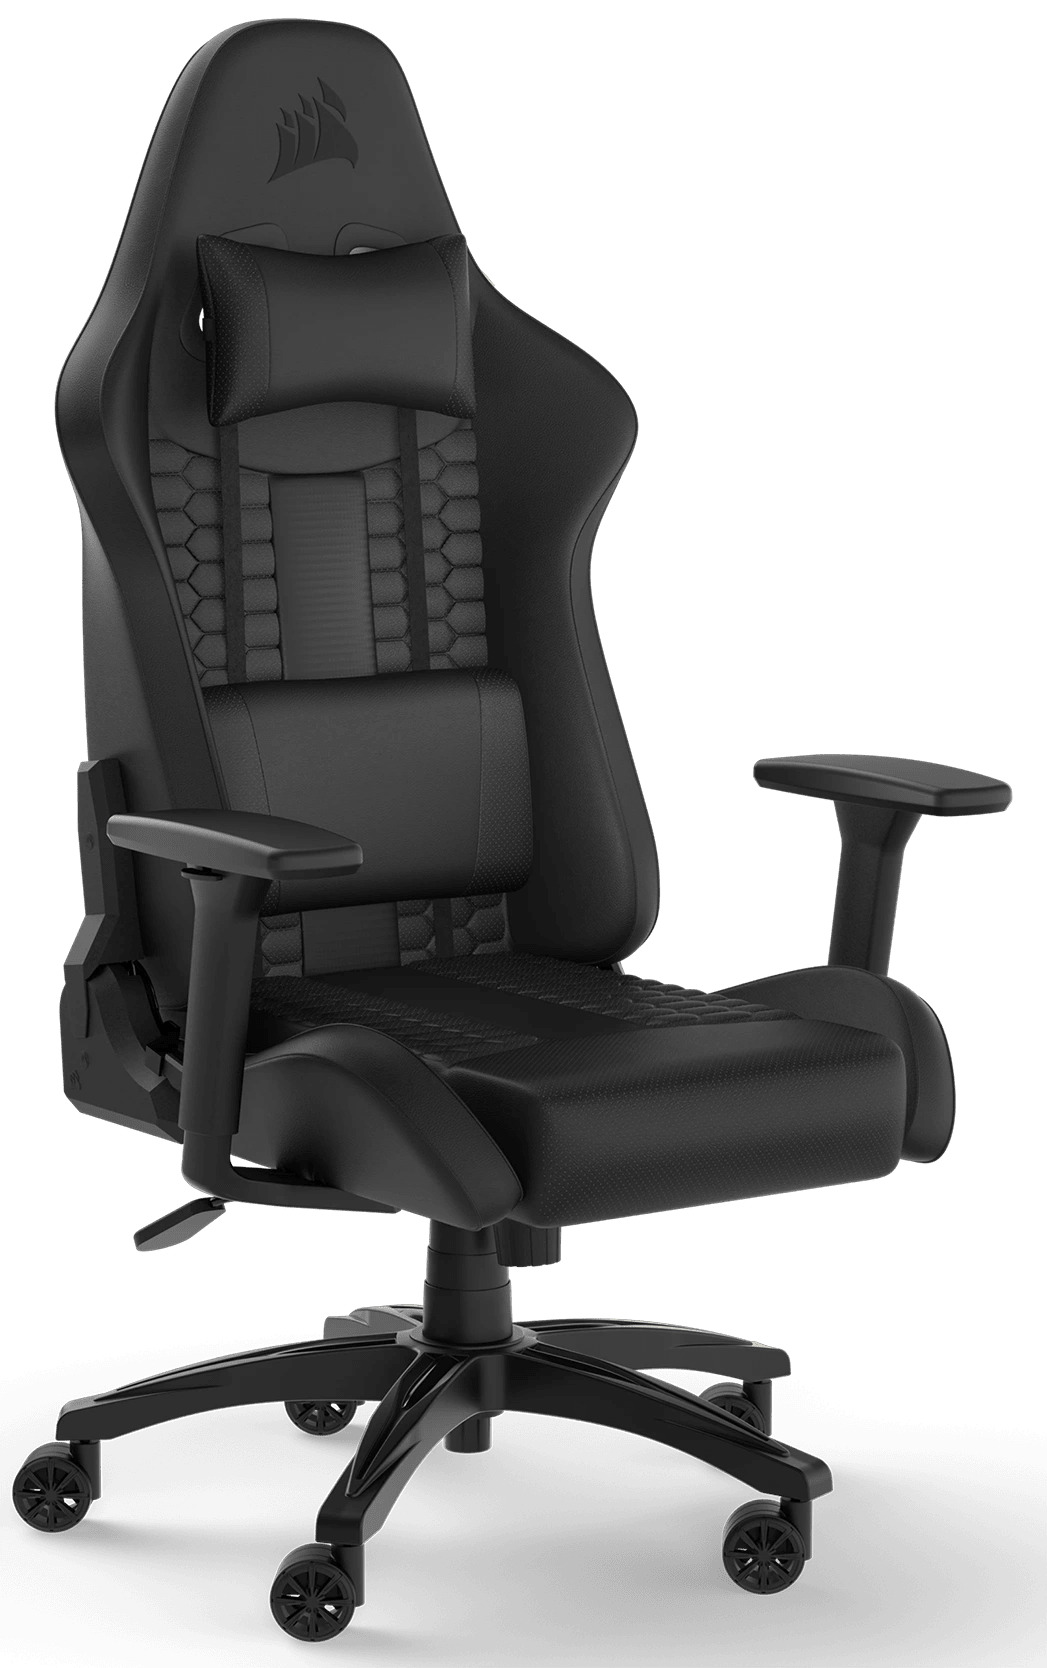 TC100 RELAXED Gaming Chair - Leatherette Black/Black (UK)